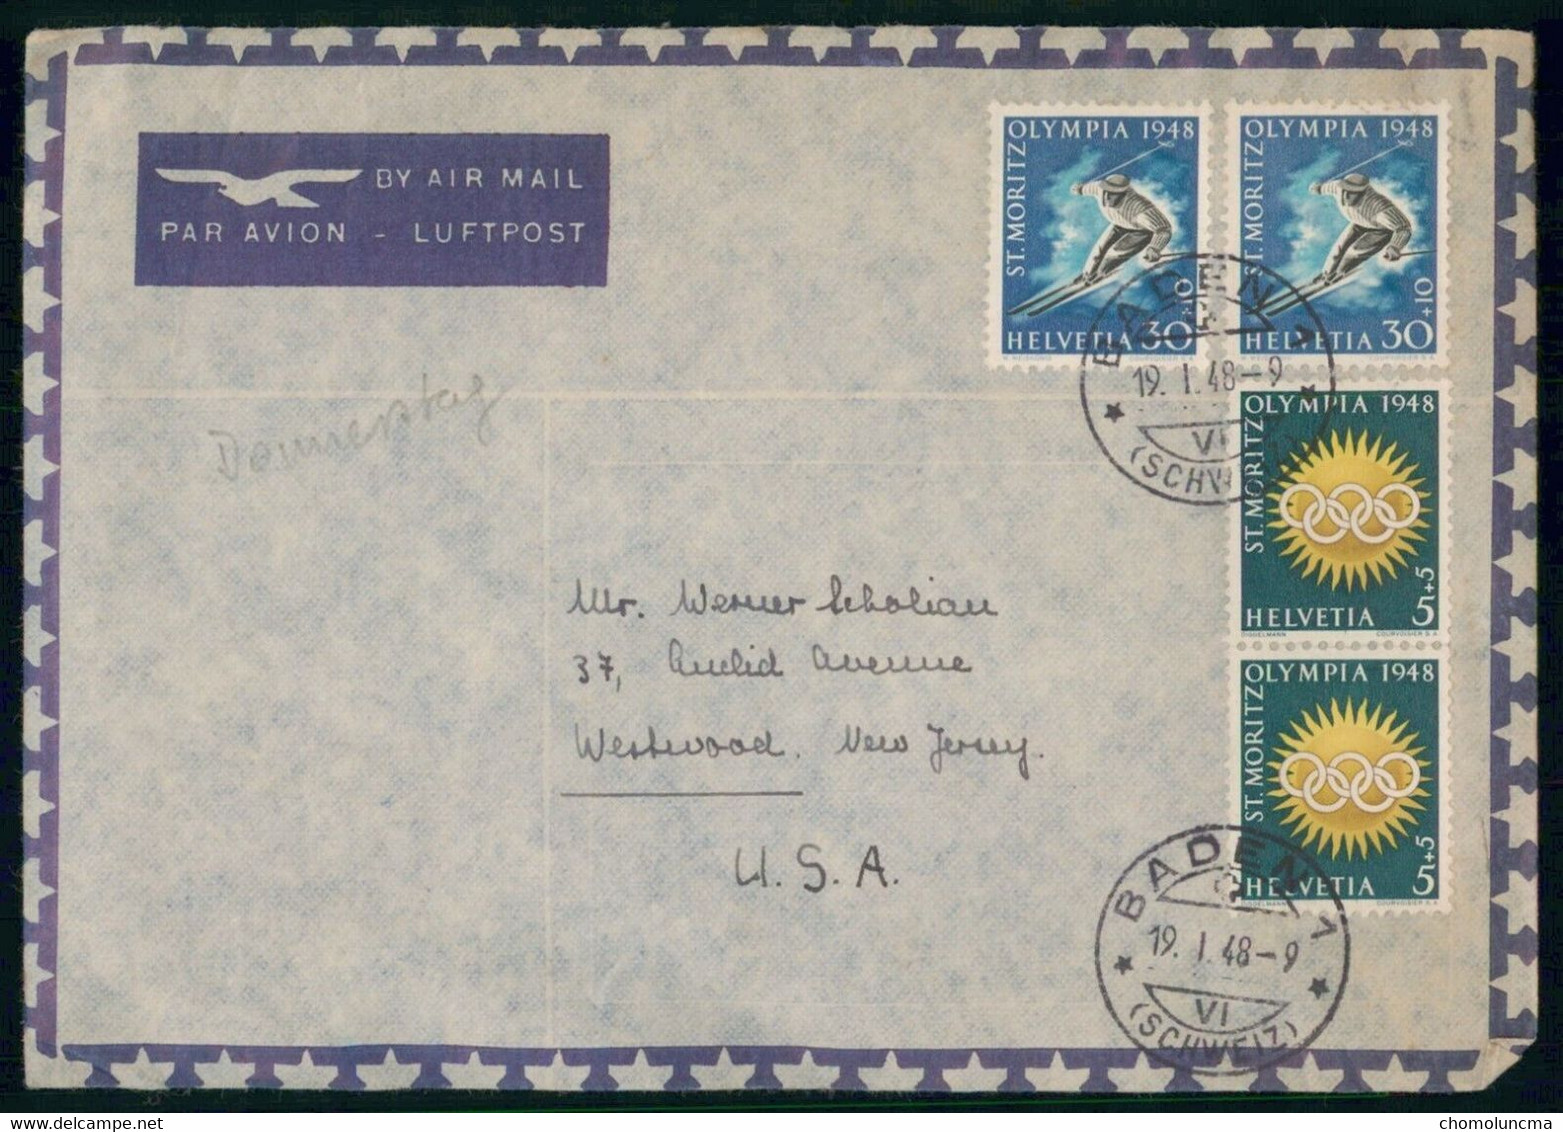 1948 St Moritz Winter Olympic Games Jeux Olympiques D'Hiver Olympische Winterspiele Cover To Westwood USA - Winter 1948: St. Moritz